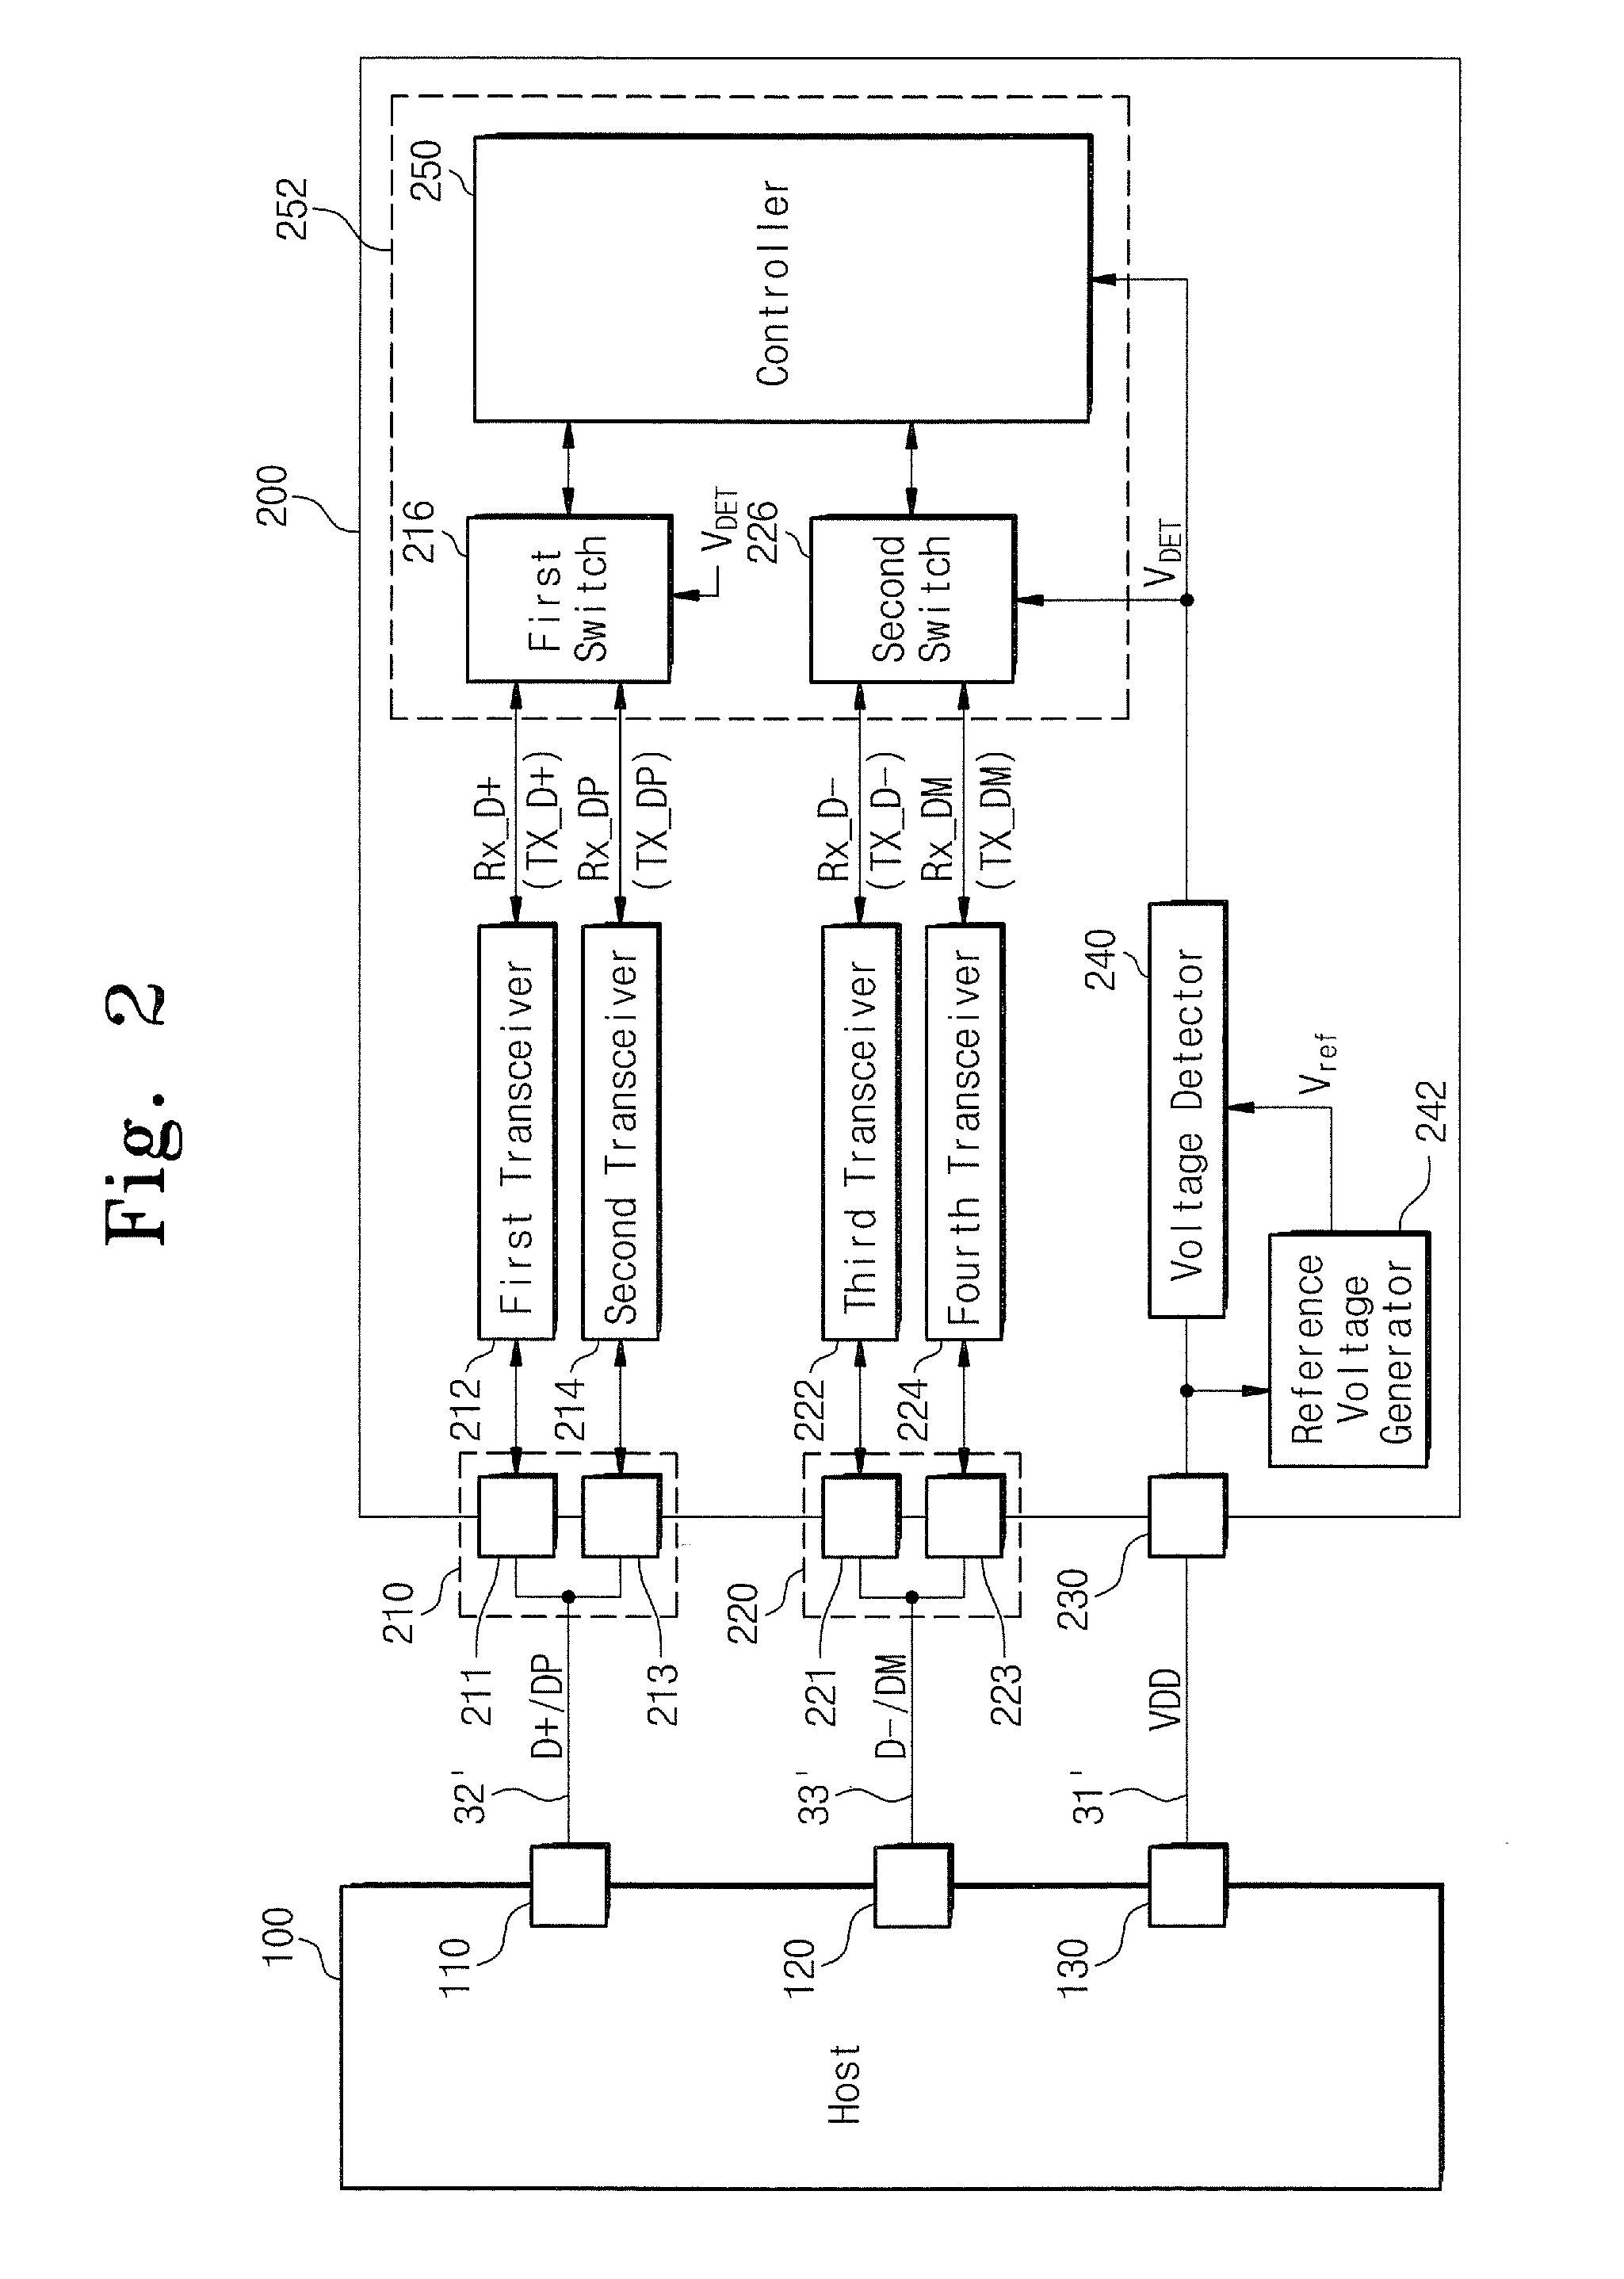 Electronic Device Having USB Interface Capable of Supporting Multiple USB Interface Standards and Methods of Operating Same